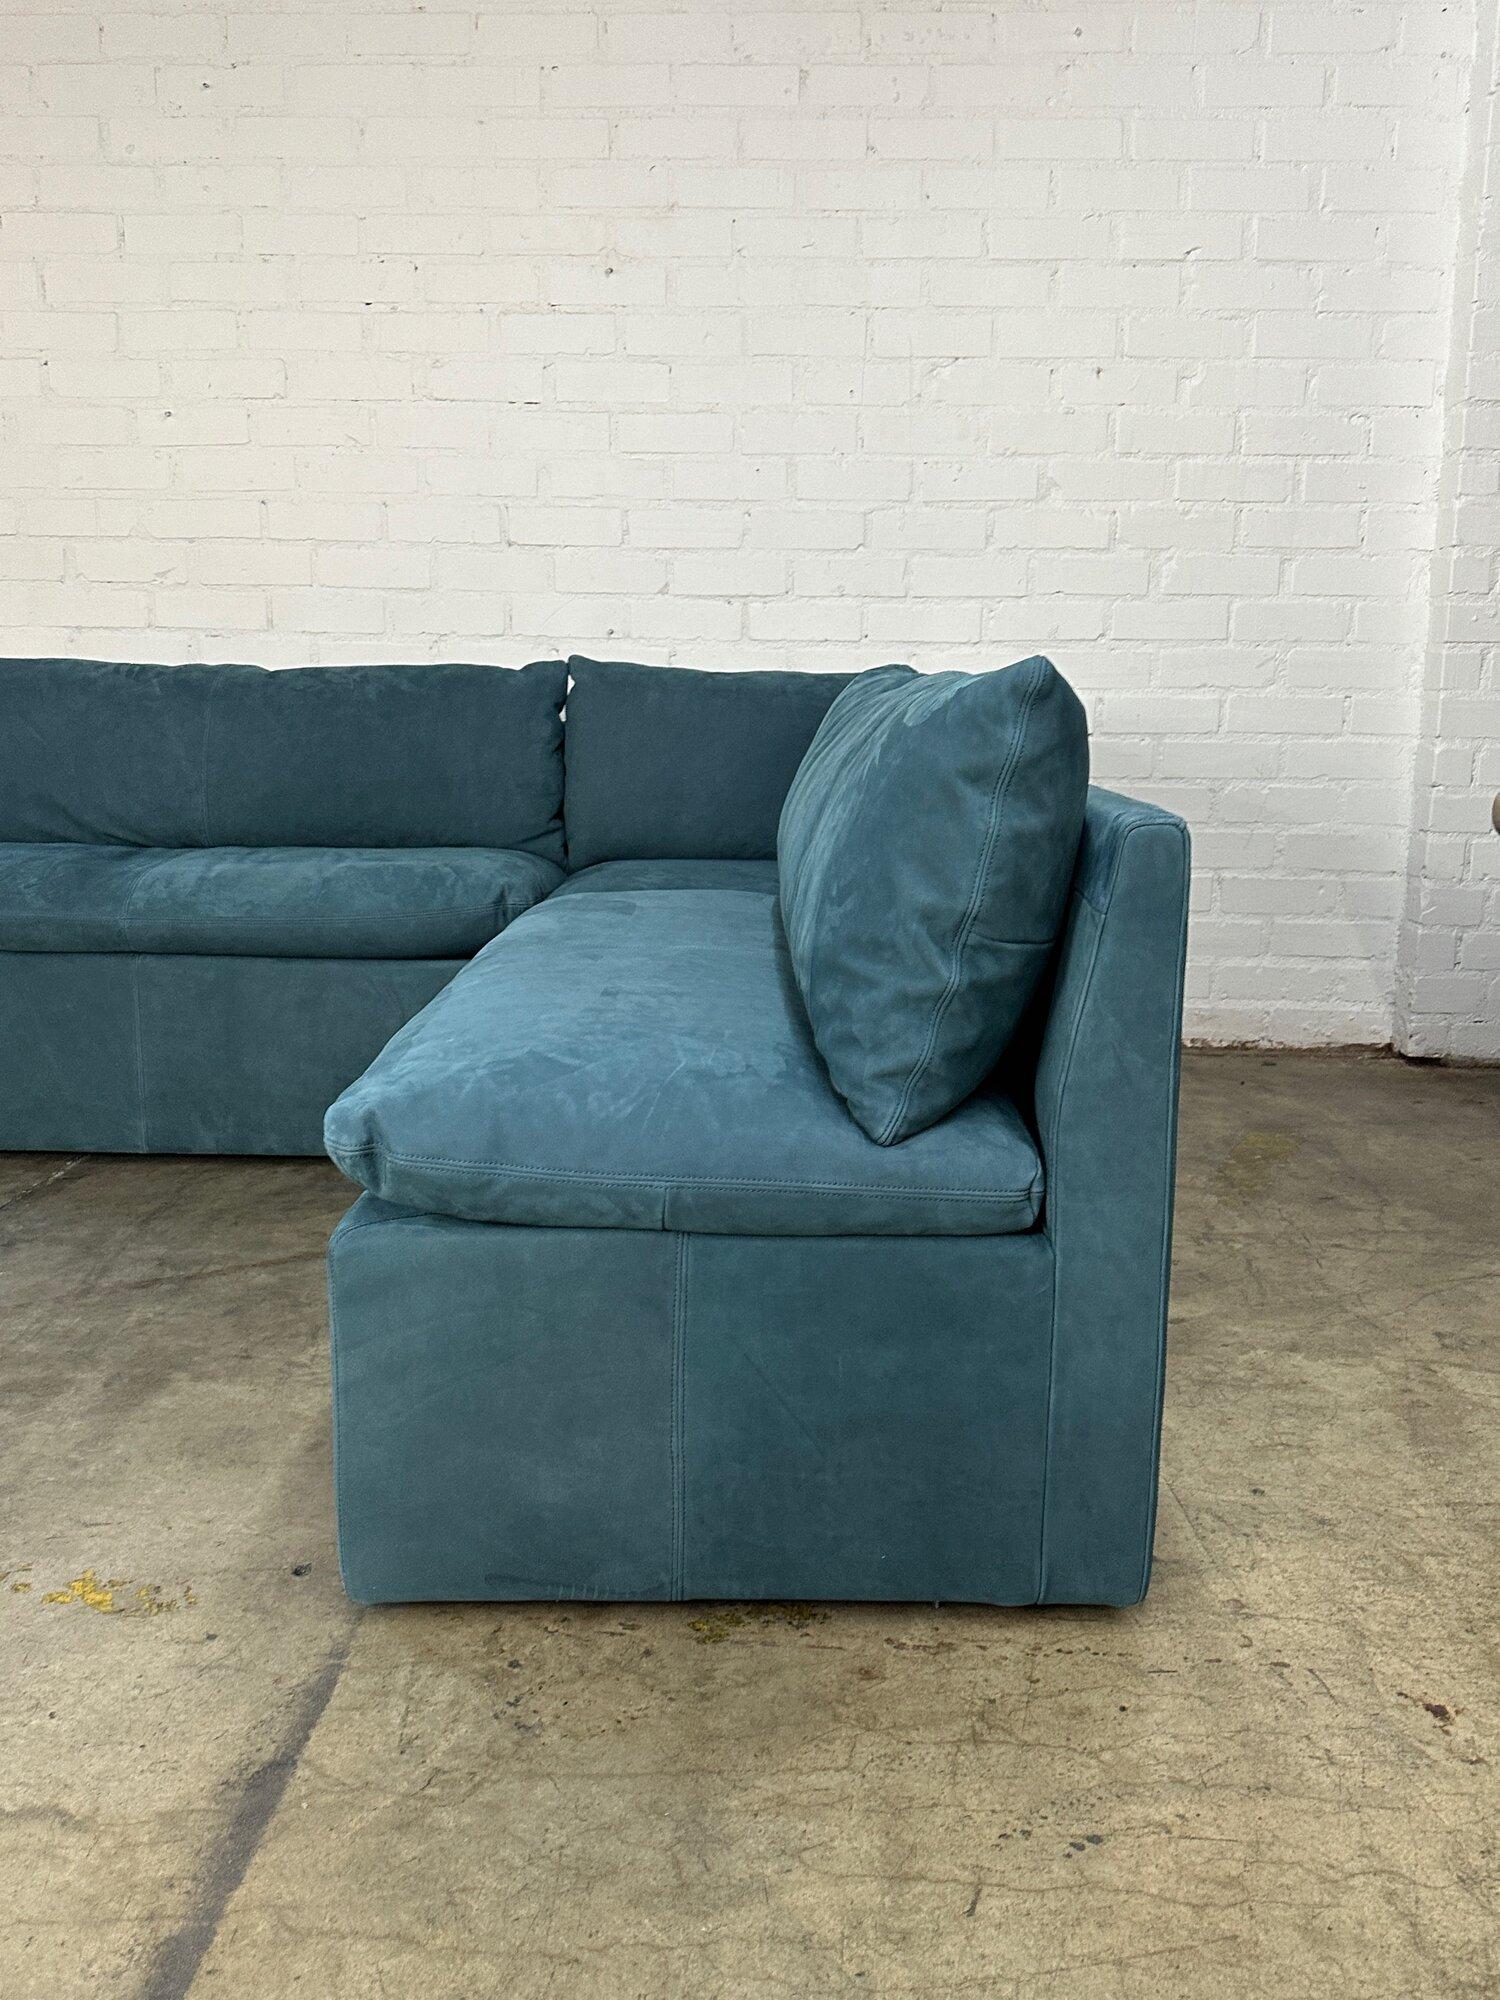 W84 D84 H30 SW73 SD18 SH18

Aria Leather Banquette by Sixpenny in the color North Atlantic. Upholstered in suede like nubuck leather in a deep teal. Item is in like new condition with very minimal areas of wear.

